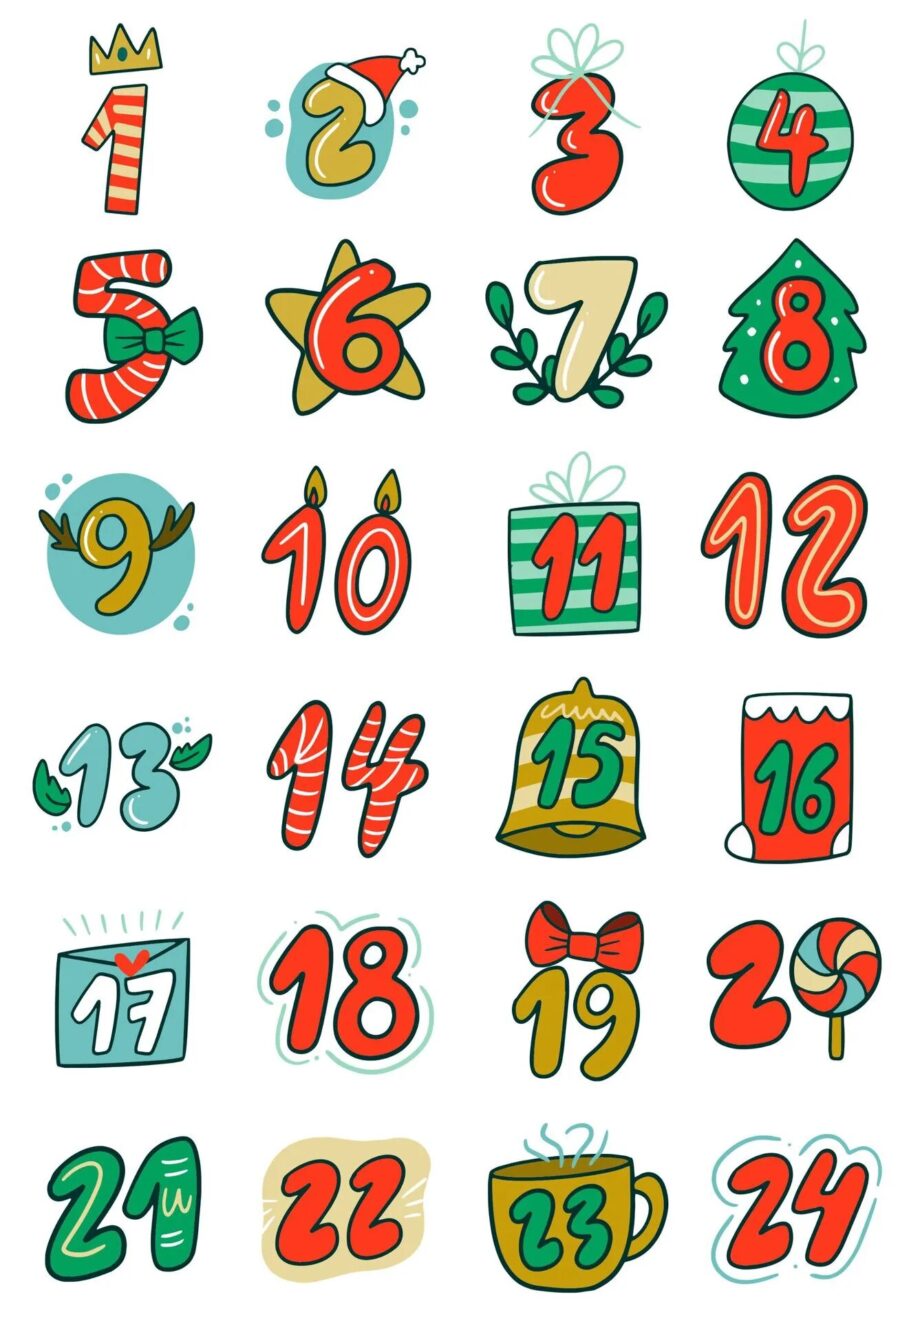 24PC Happy Christmas Day Gift Stickers Advent Calendar Number Paper Stickers Multi-Function Gift Packaging Adhesive Labels Decor MIX 9